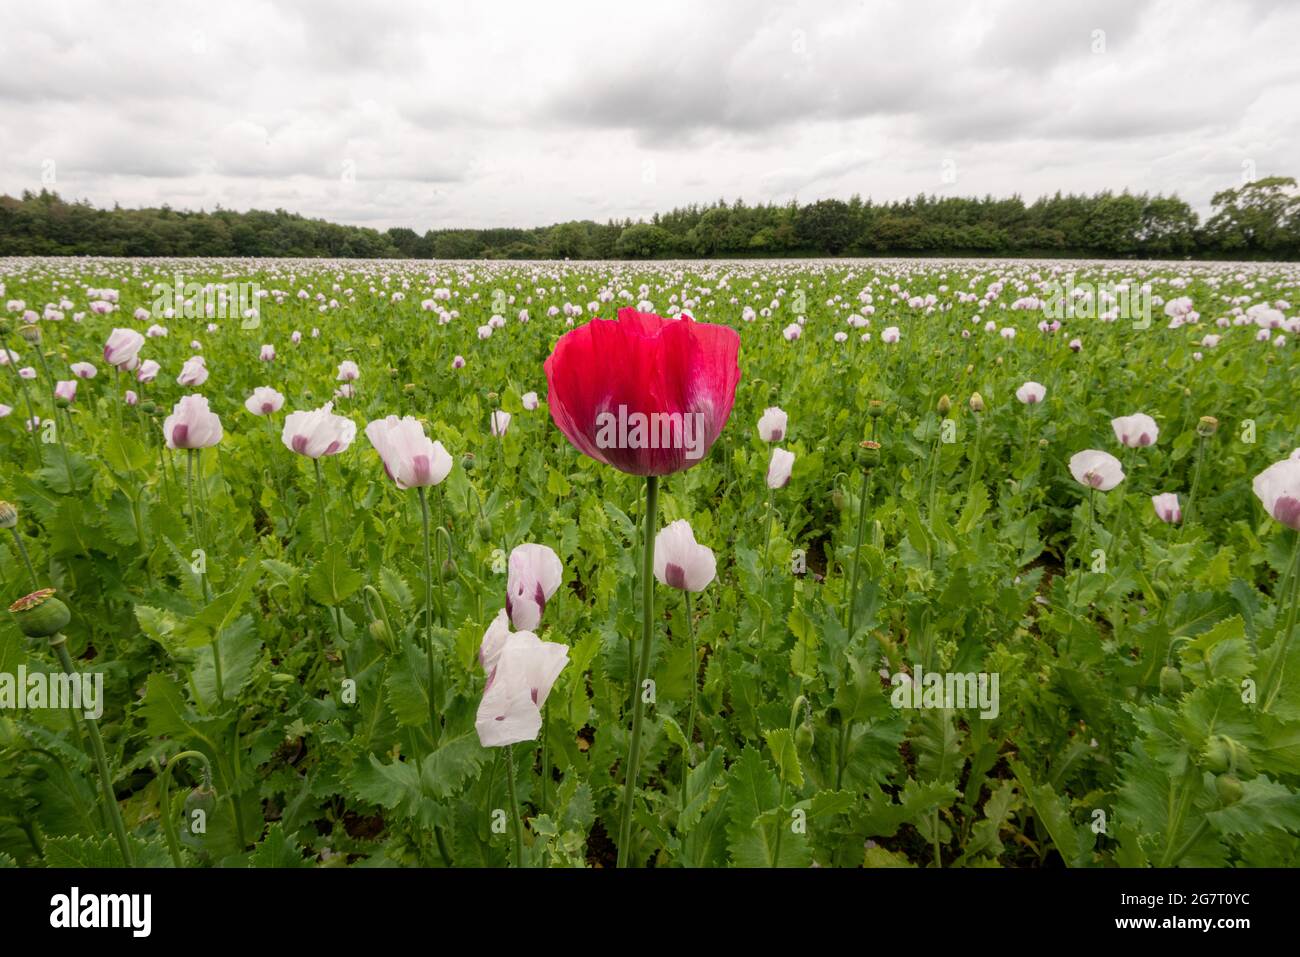 Standing out from the crowd. A single red poppy towers over a field of liliac medicinal opium poppies growing in a field in Hampshire, UK Stock Photo